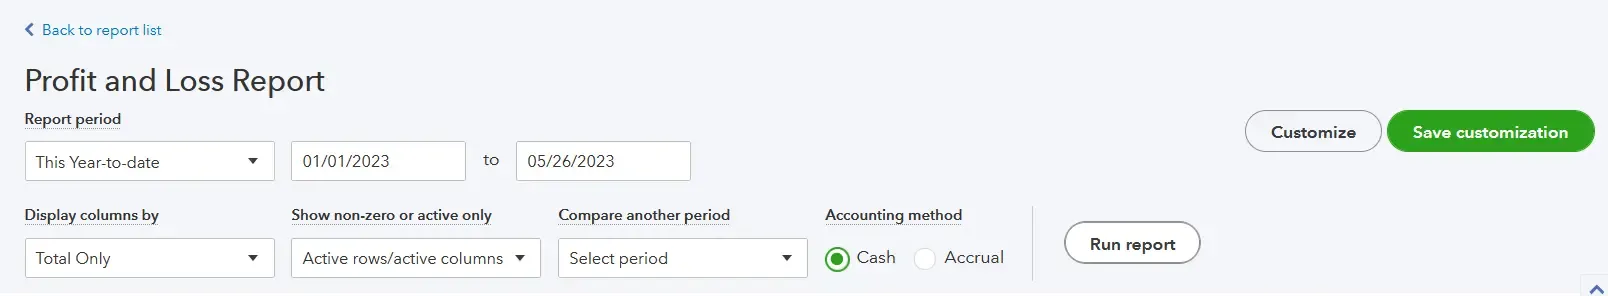 profit and loss report in quickbooks online to resolve unapplied cash payments